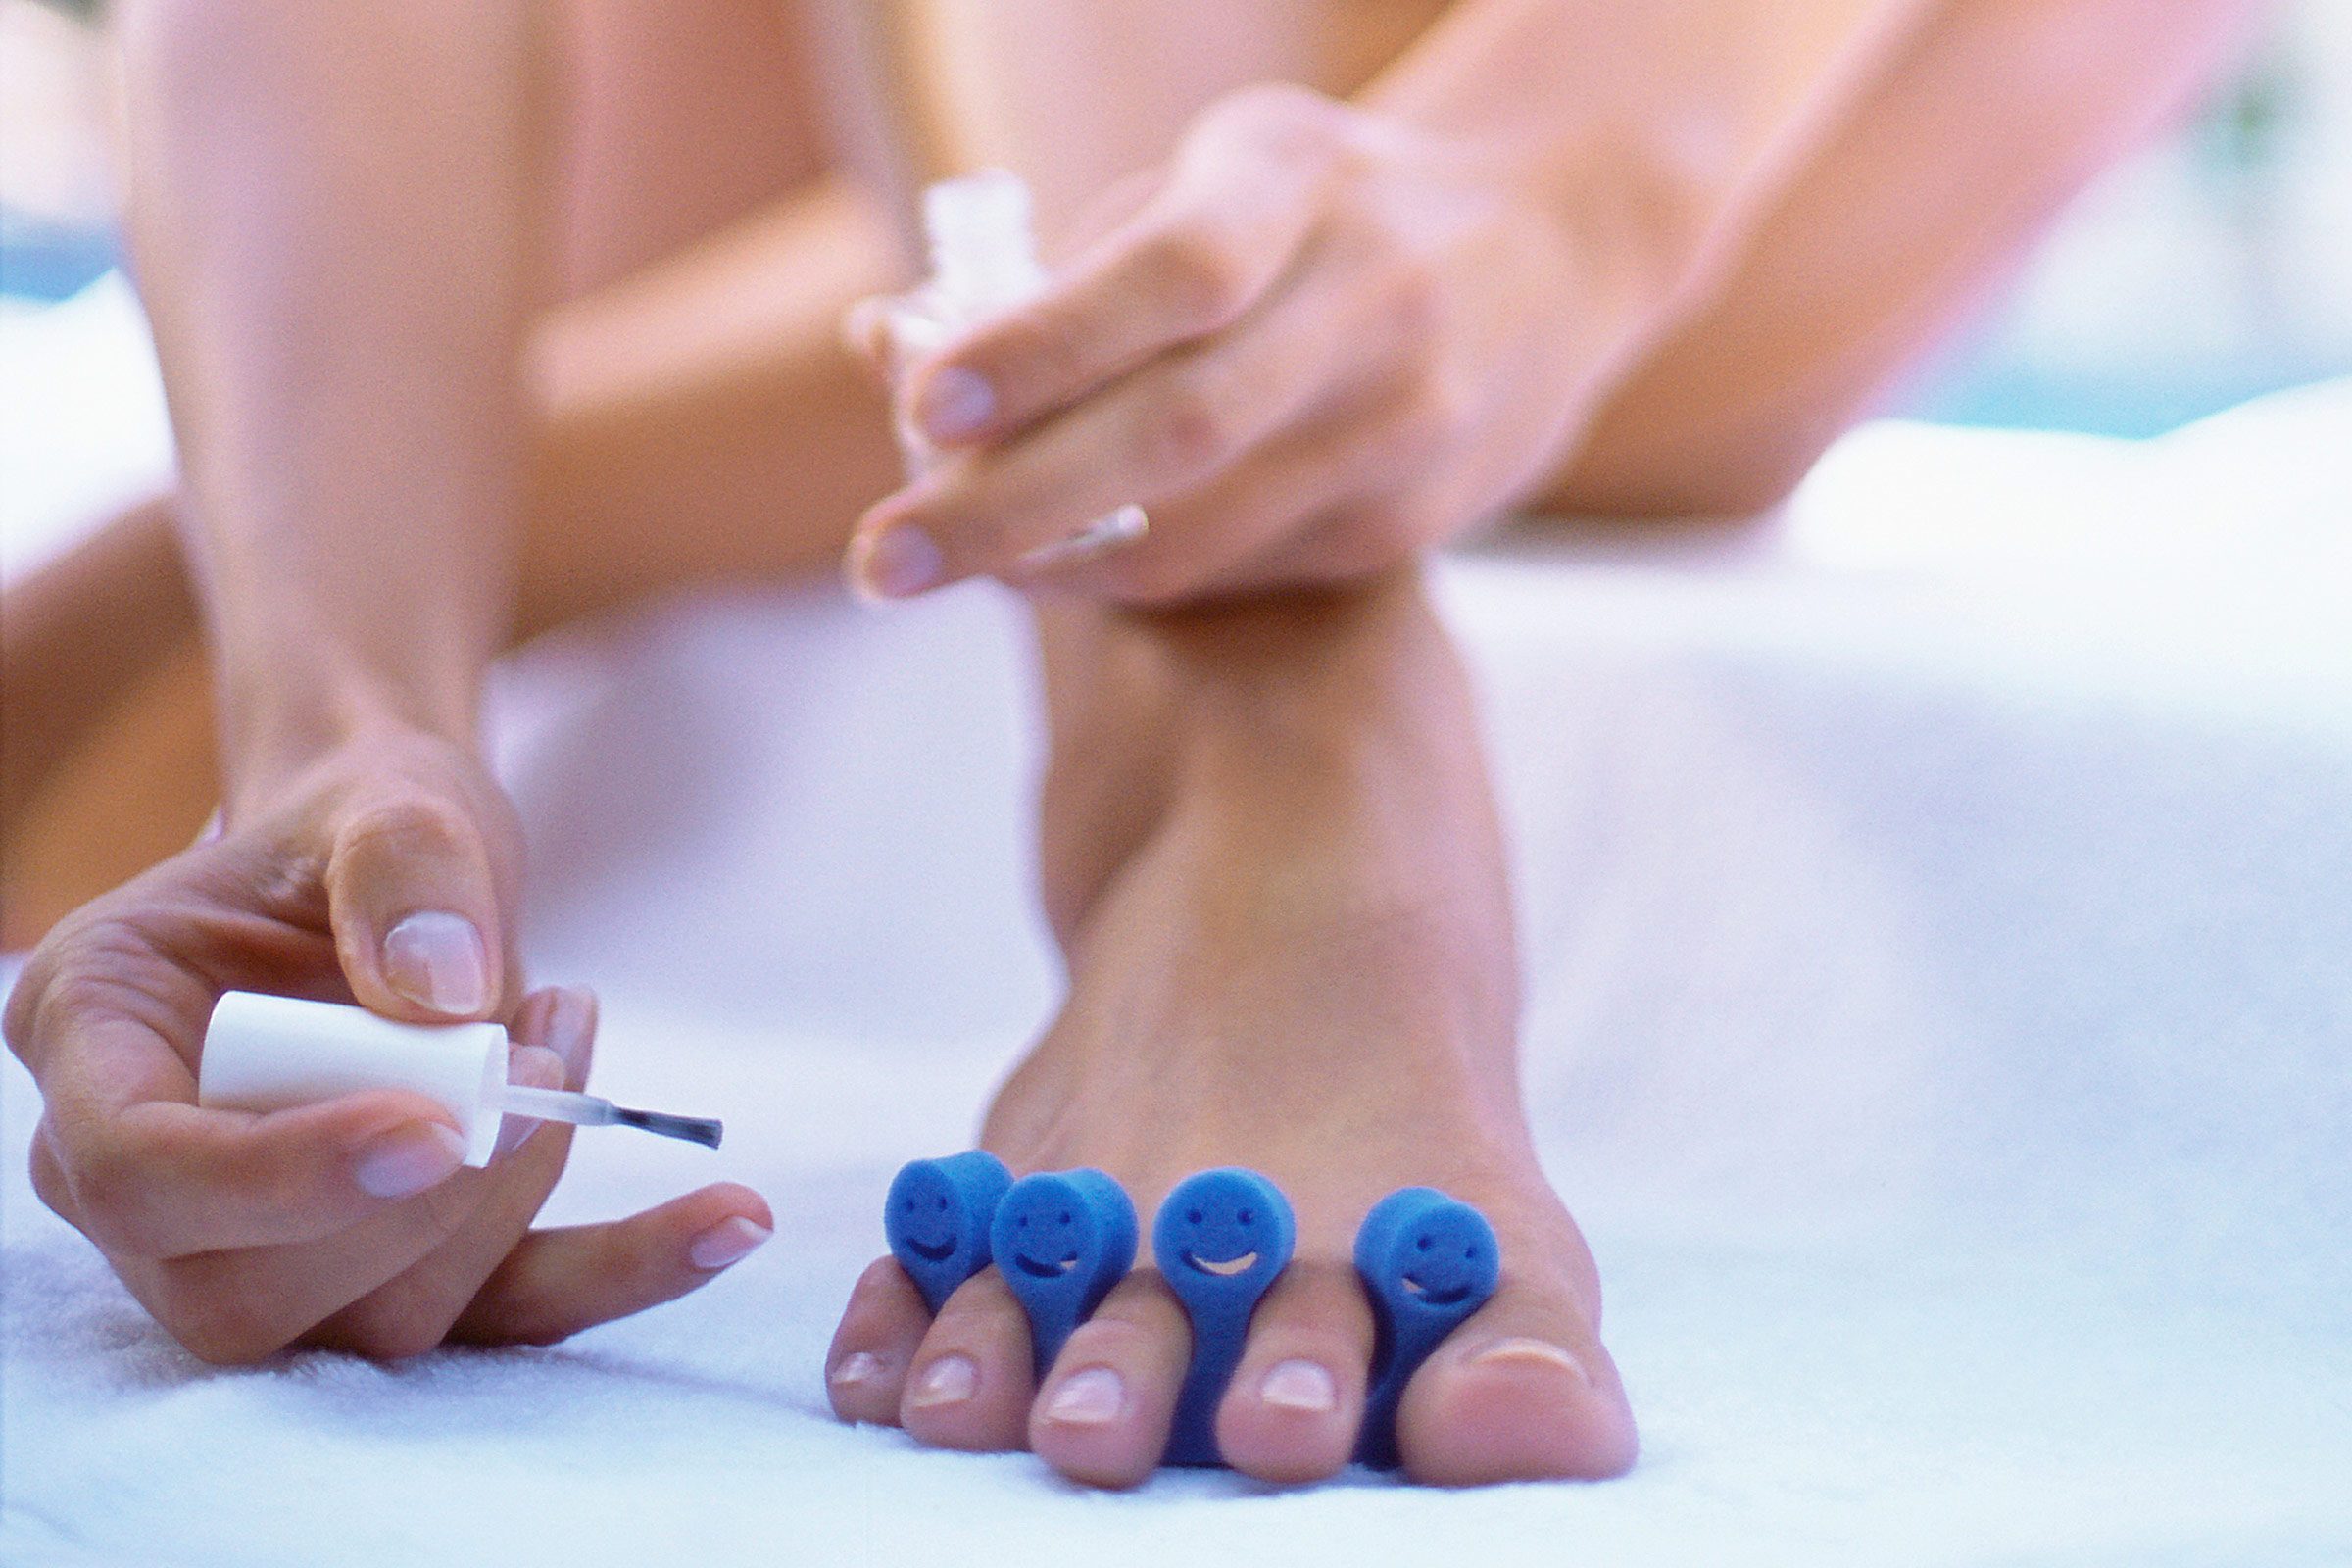 How to Get Healthy and Pretty Feet for Summer